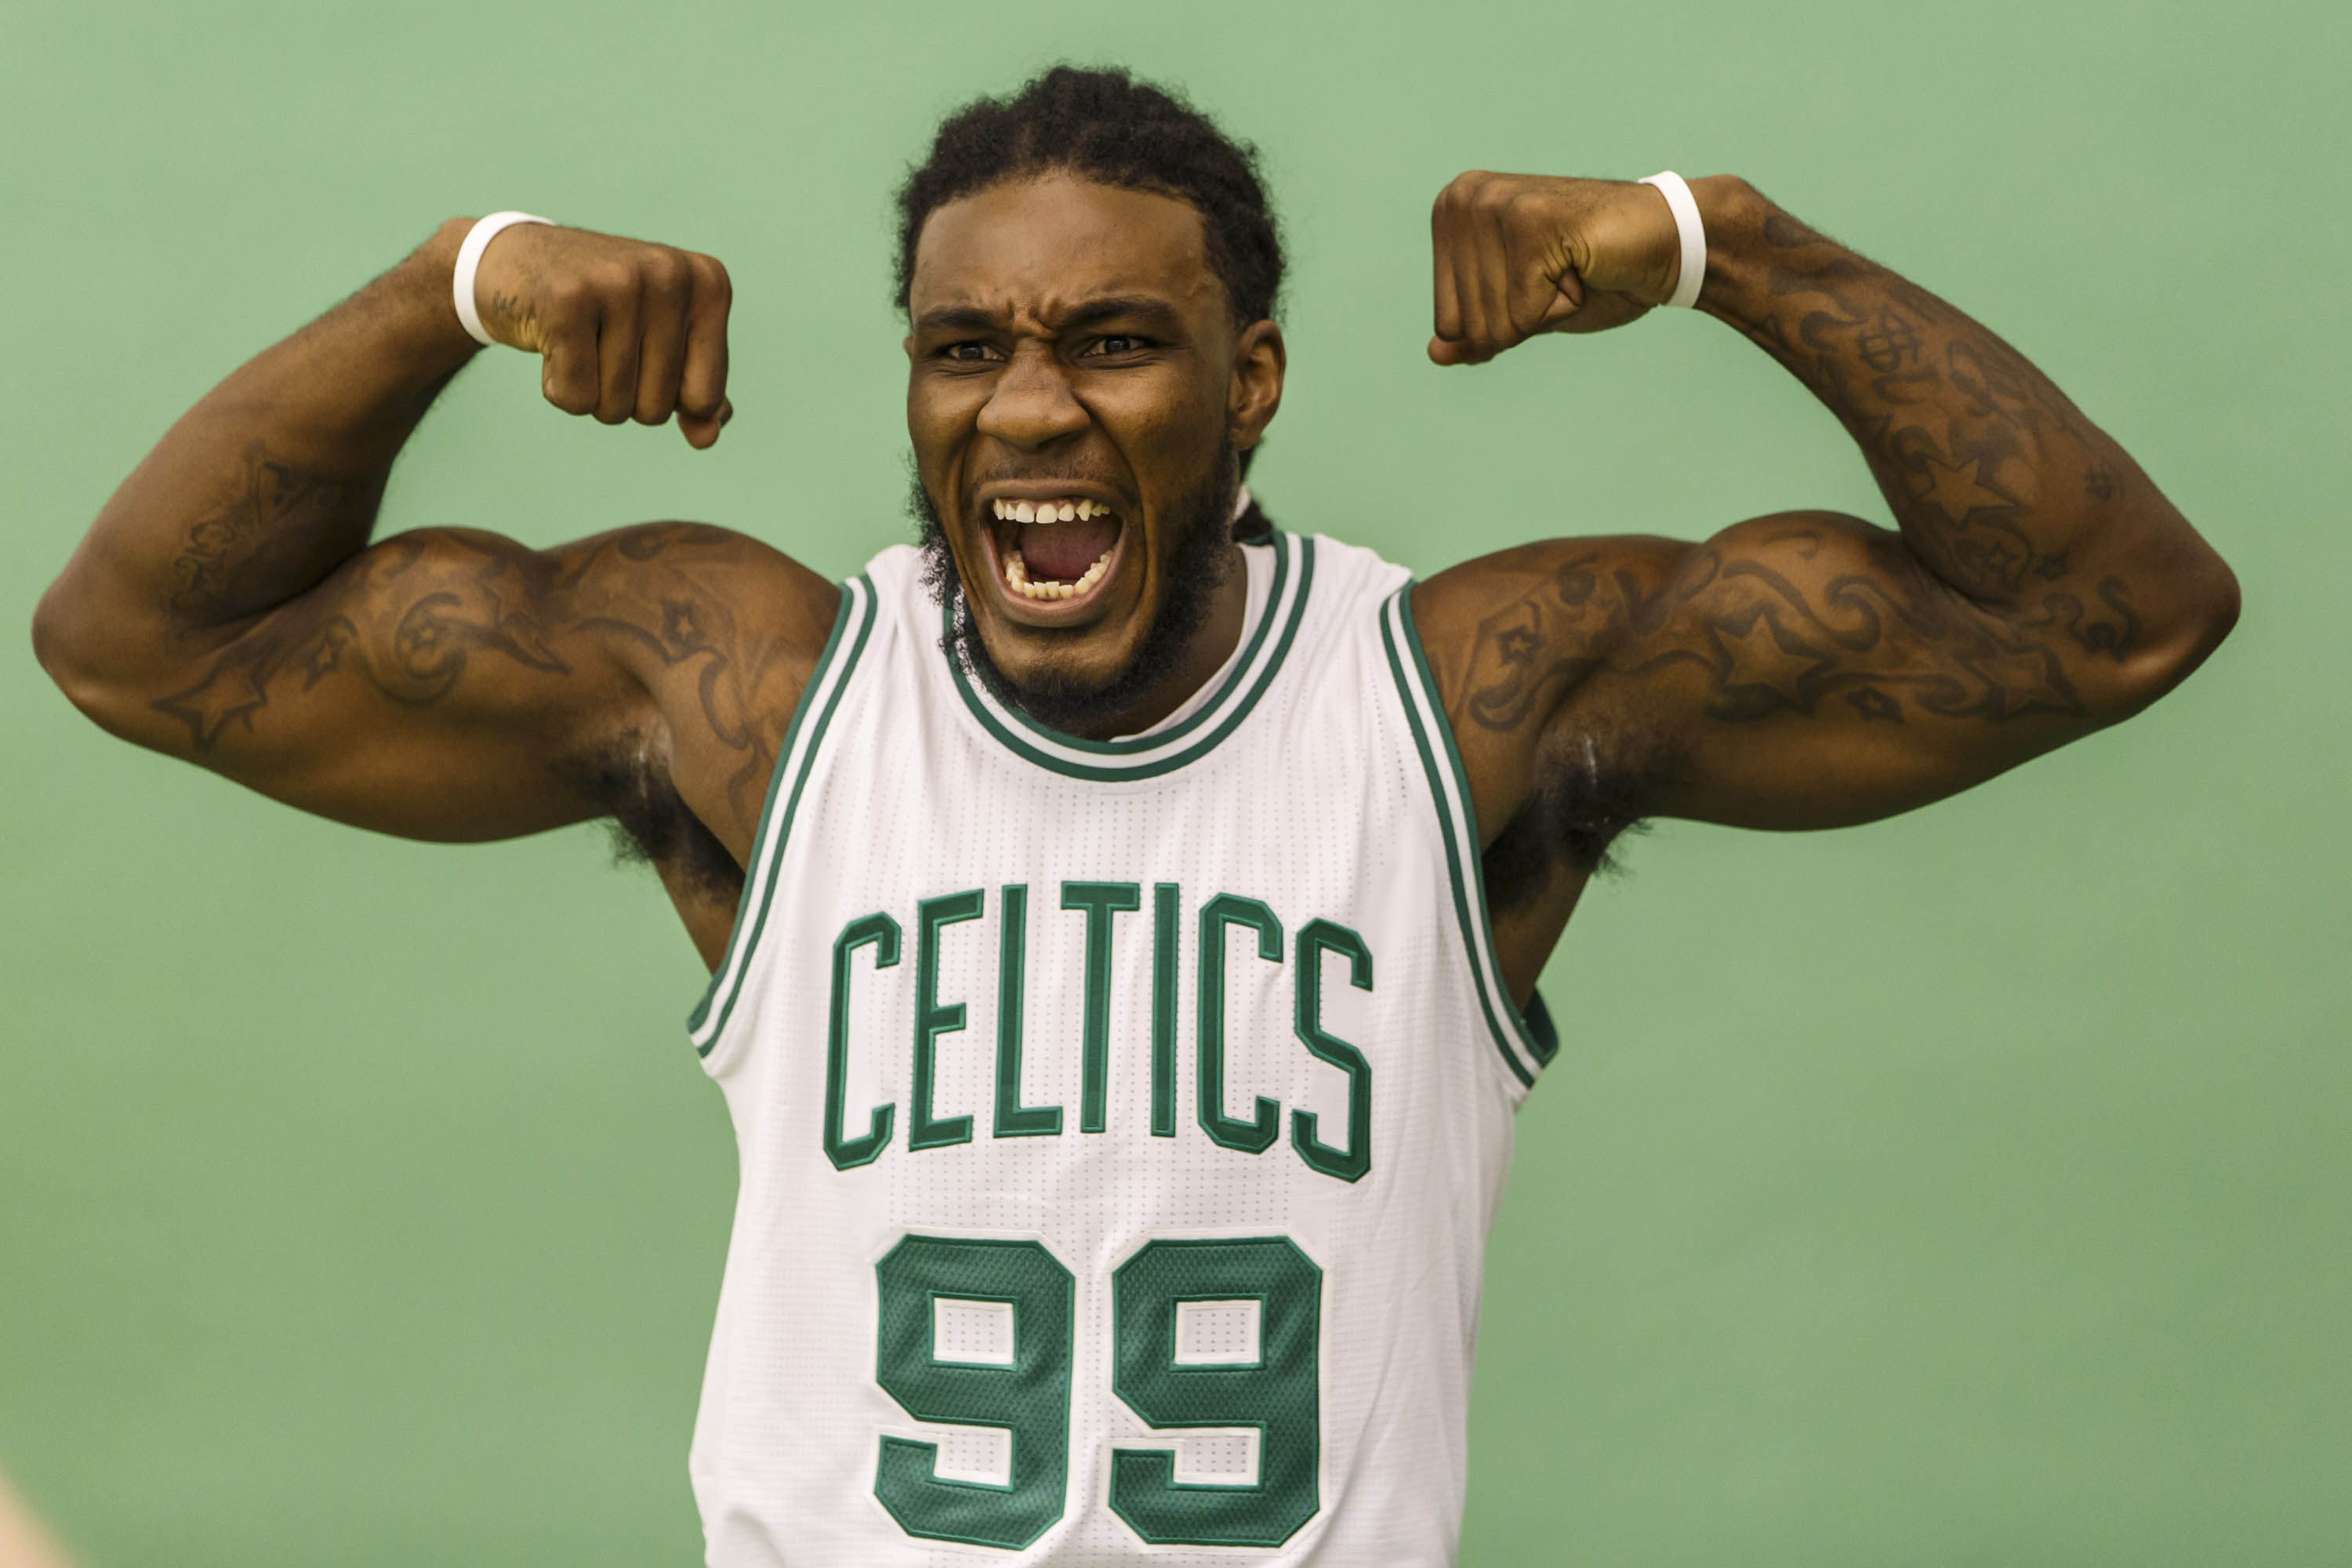 Jae Crowder got paid this summer, but will it pay off?